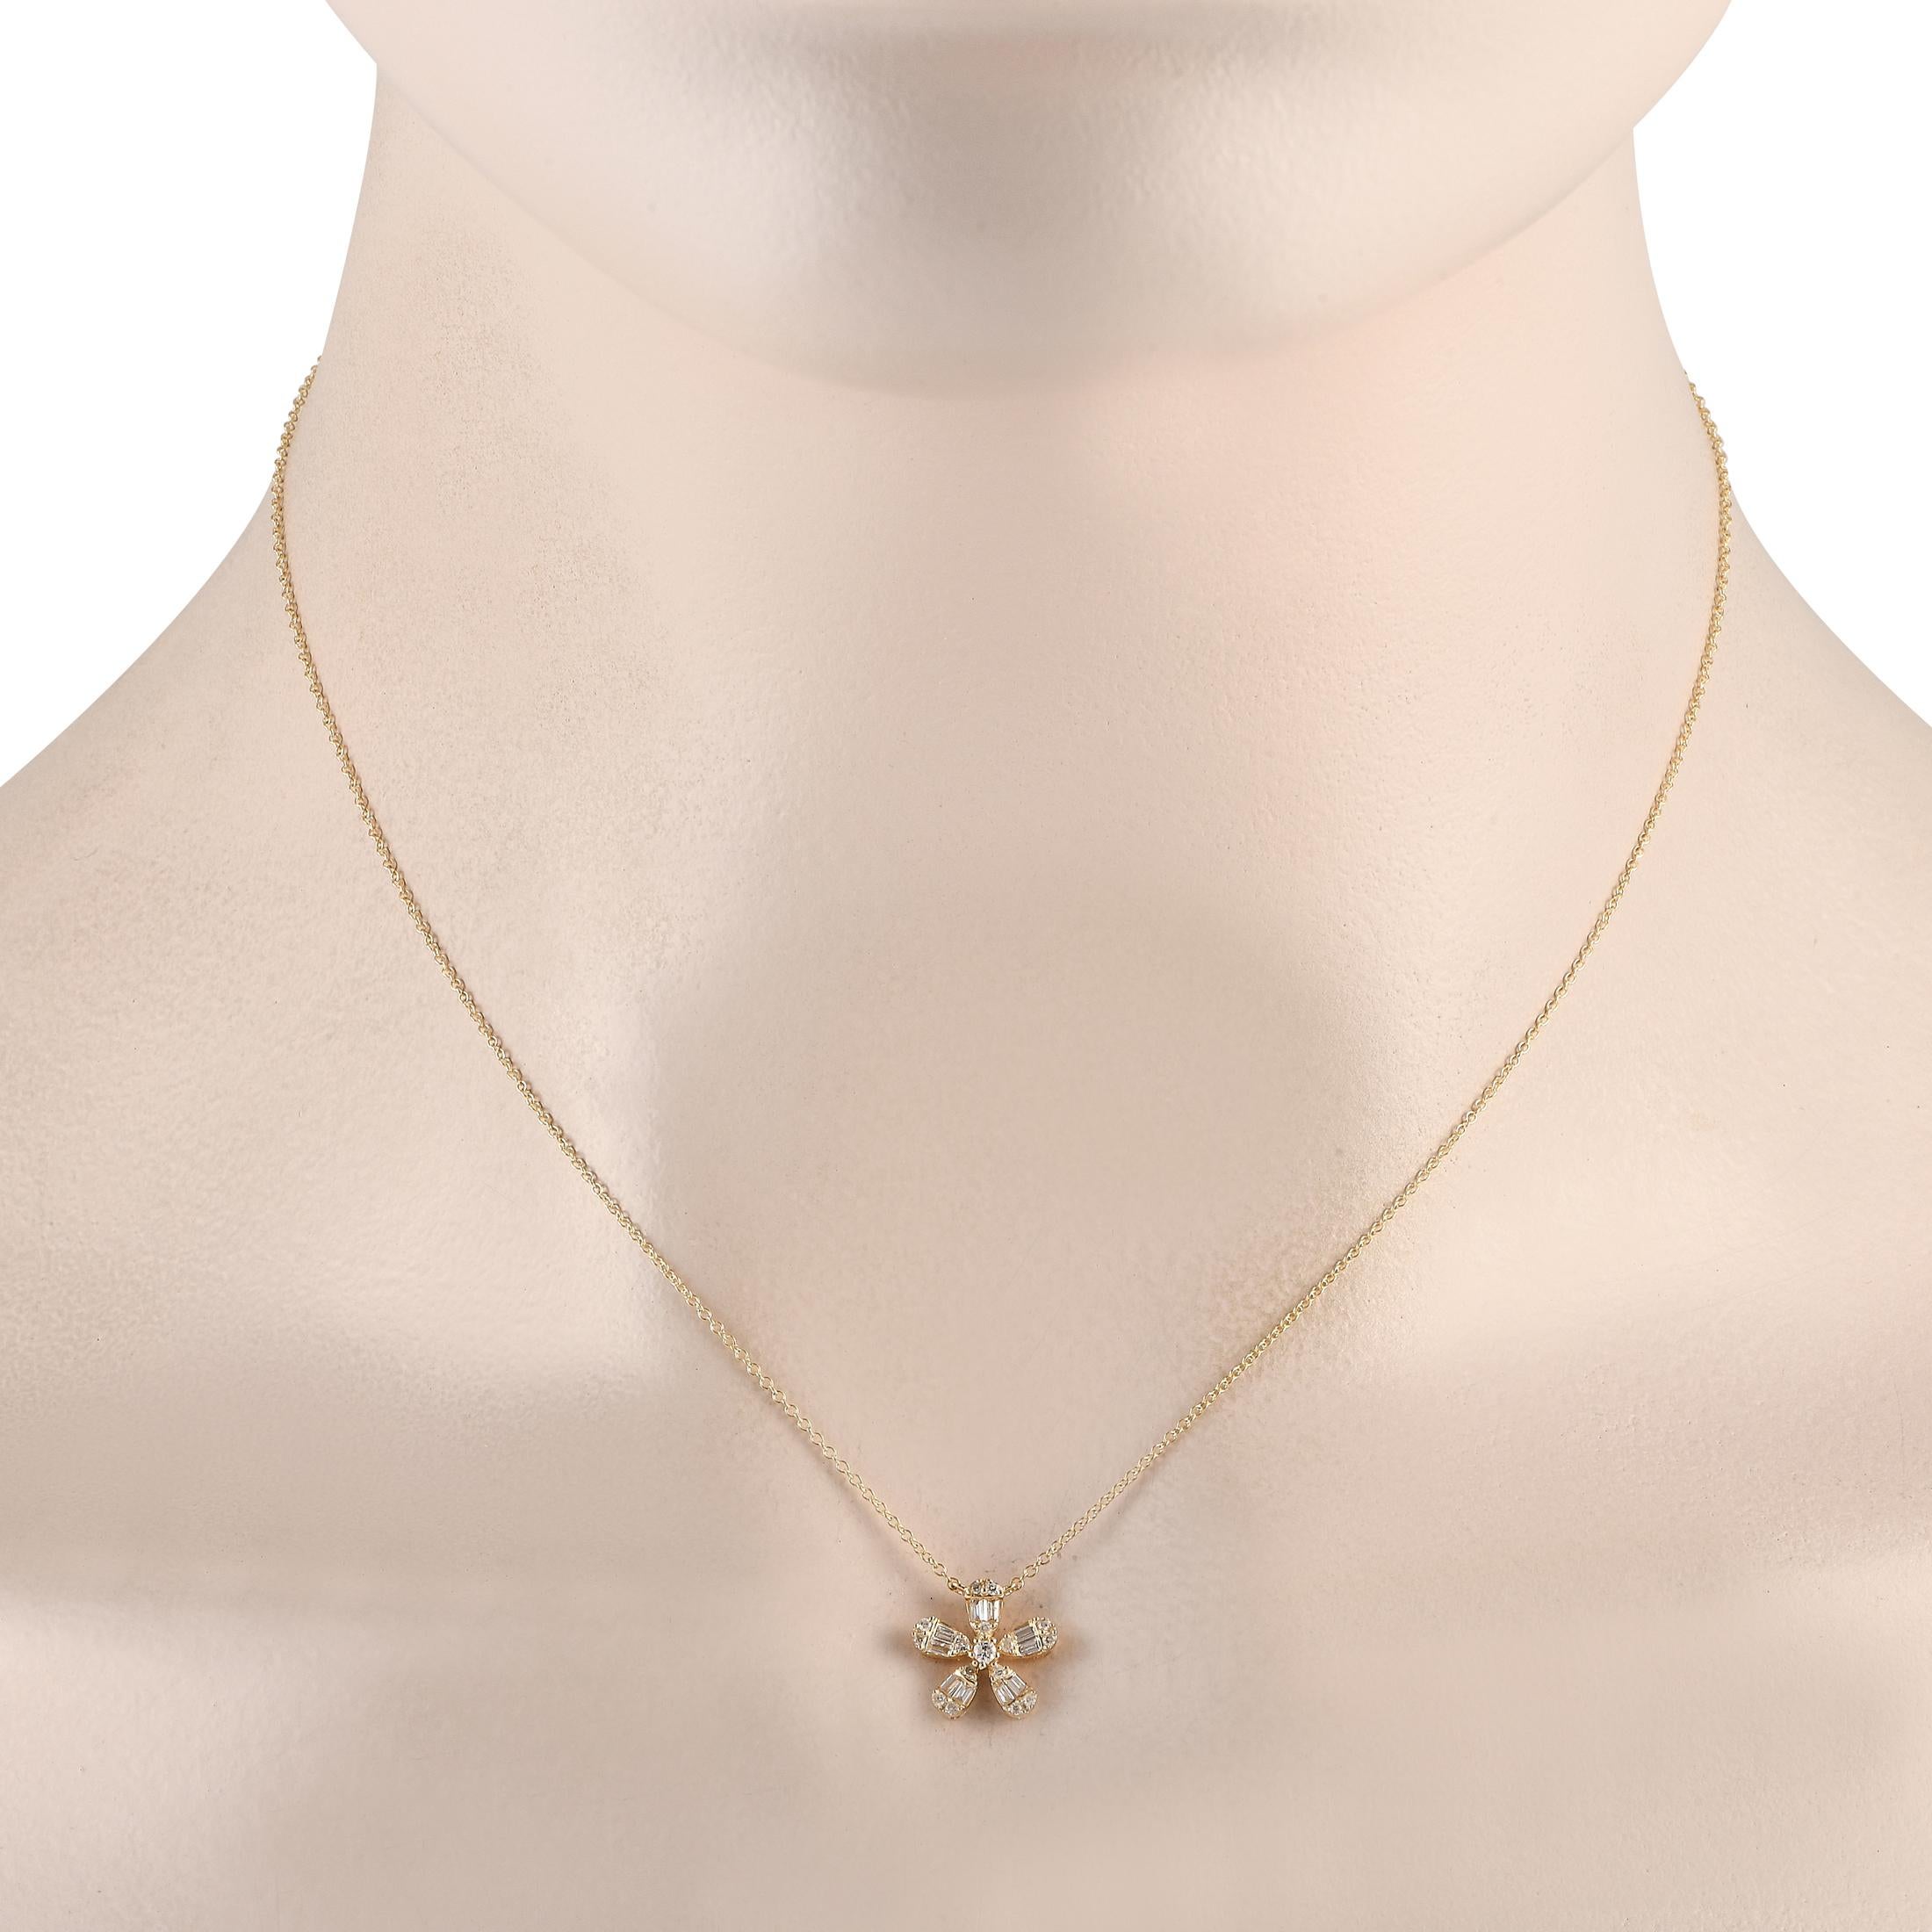 Diamonds with a total weight of 0.23 carats add a touch of sparkle to this necklaces charming floral-shaped pendant. Suspended at the center of a 16 chain, the pendant measures 0.45 round and is crafted from lustrous 14K yellow gold.This jewelry